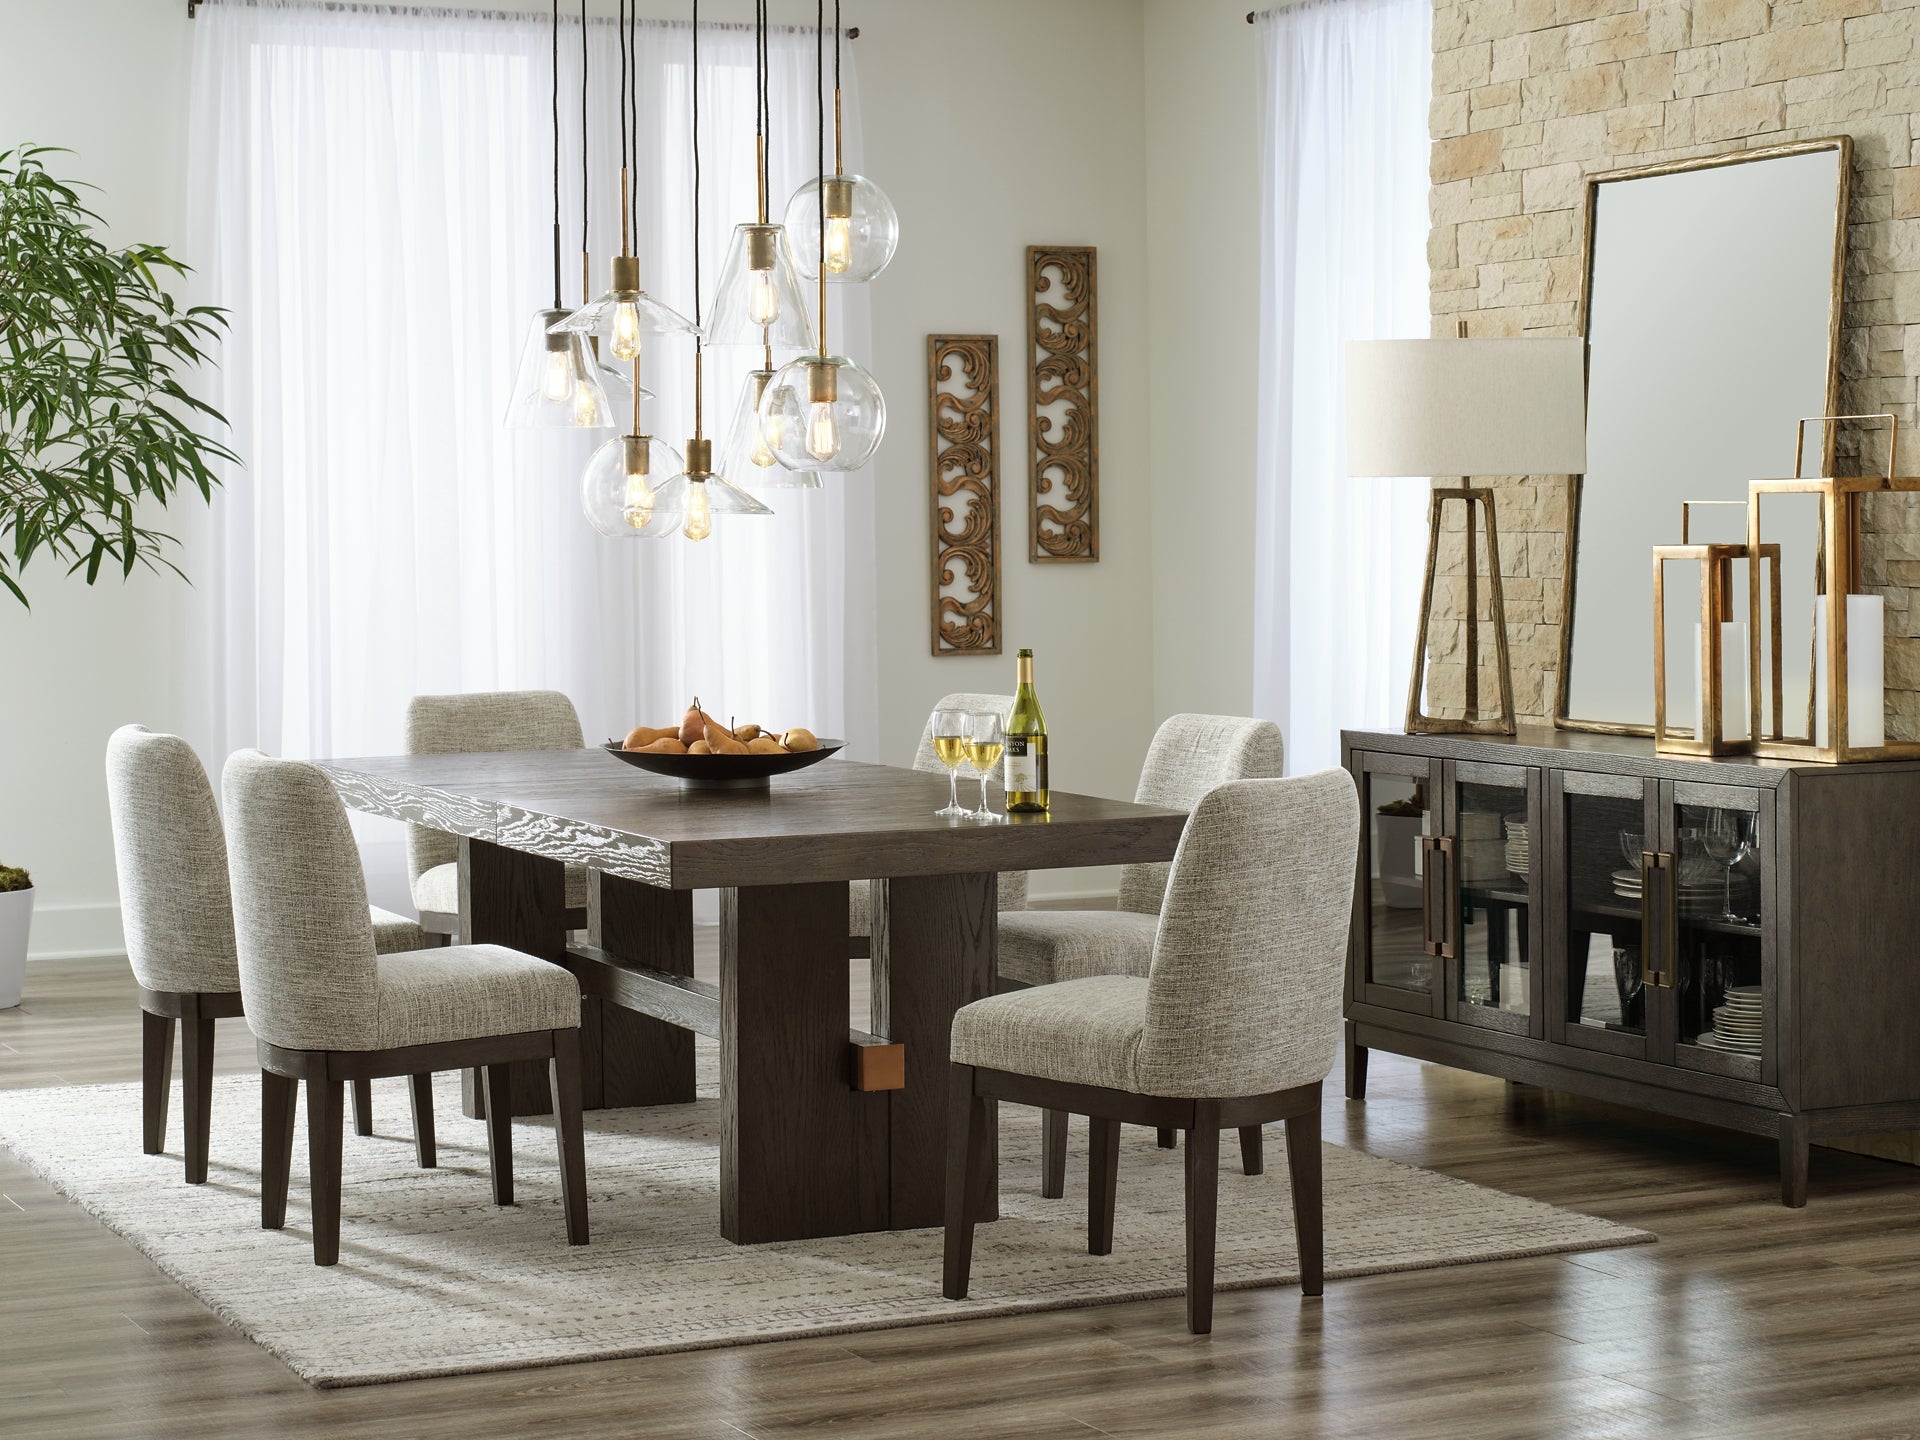 Burkhaus Dining Table and 6 Chairs JB's Furniture  Home Furniture, Home Decor, Furniture Store